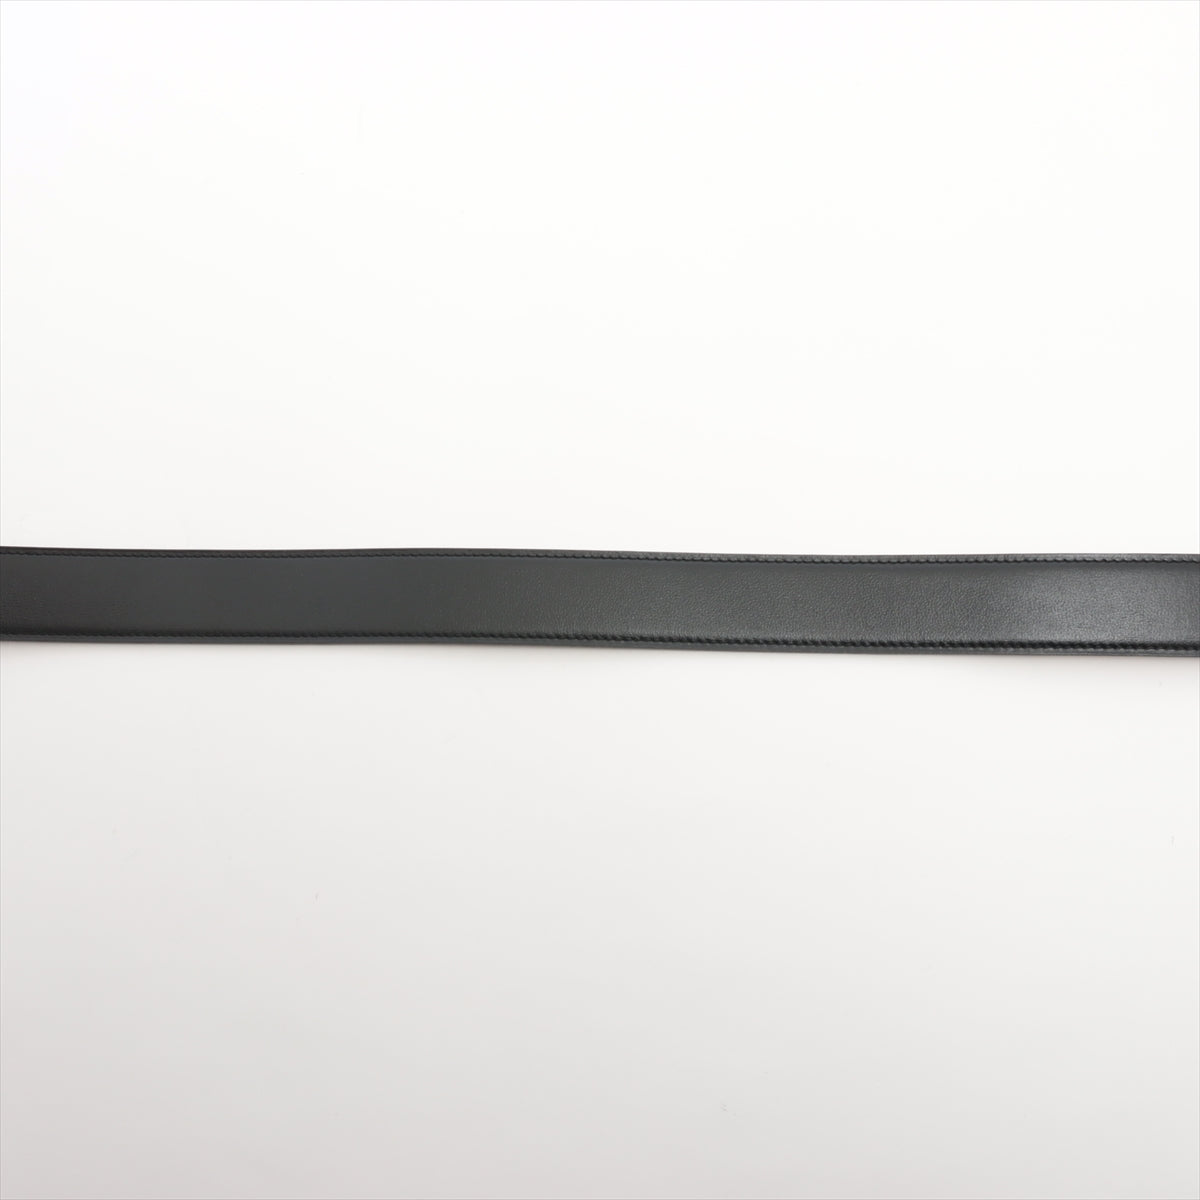 Hermès H Belt Y:2020 Belt 115 Leather Black Scratched Peeling Stained Discoloration With odor